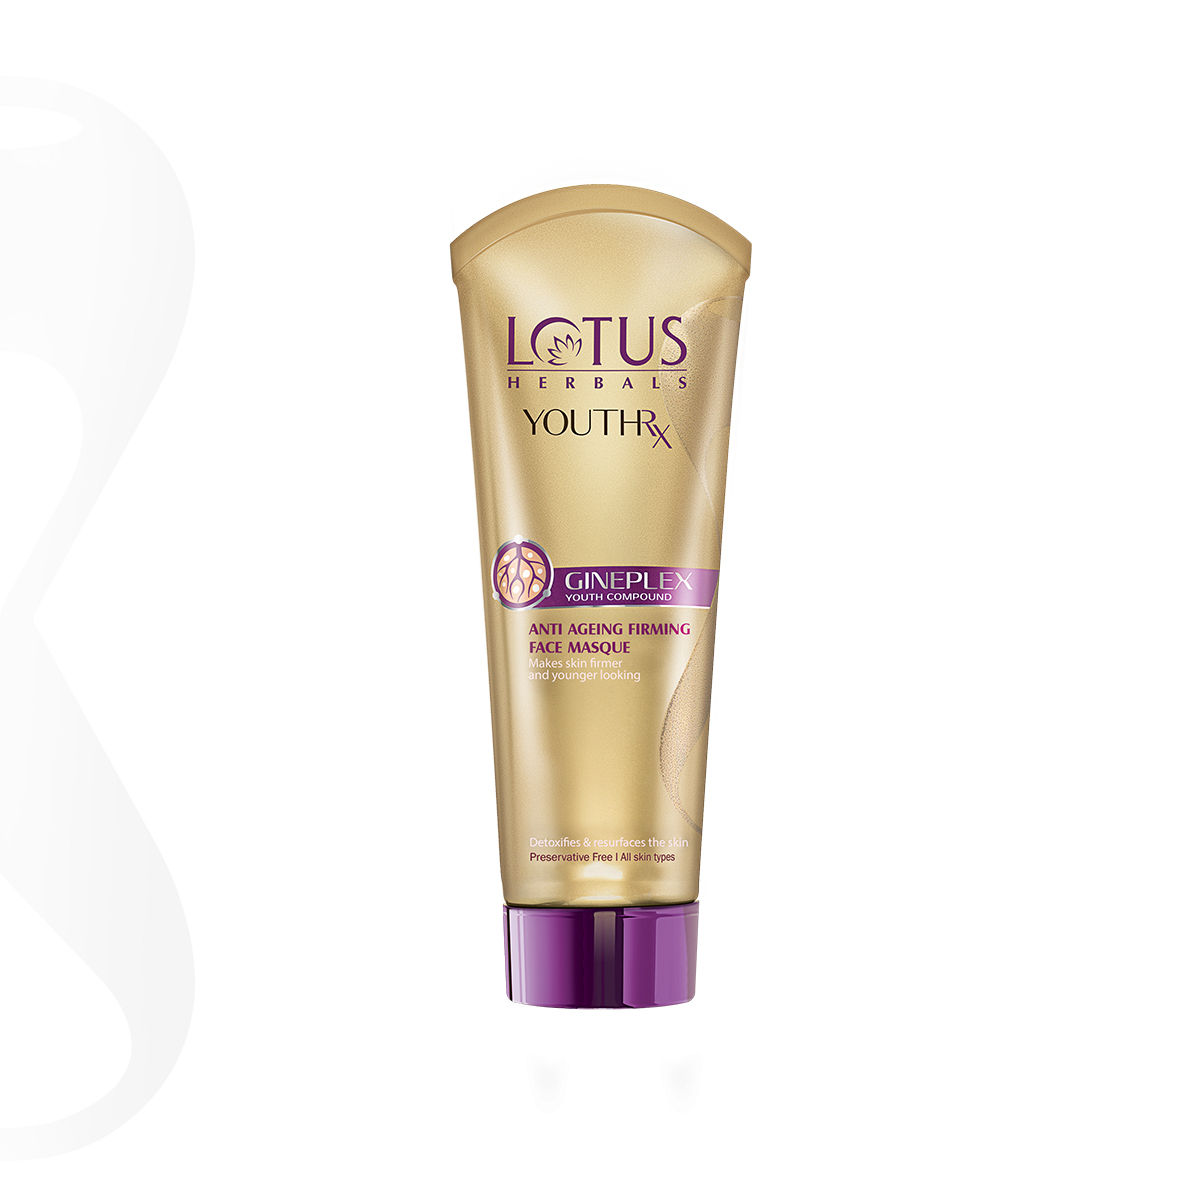 Lotus Herbals YouthRx Anti-Ageing Firming Face Masque